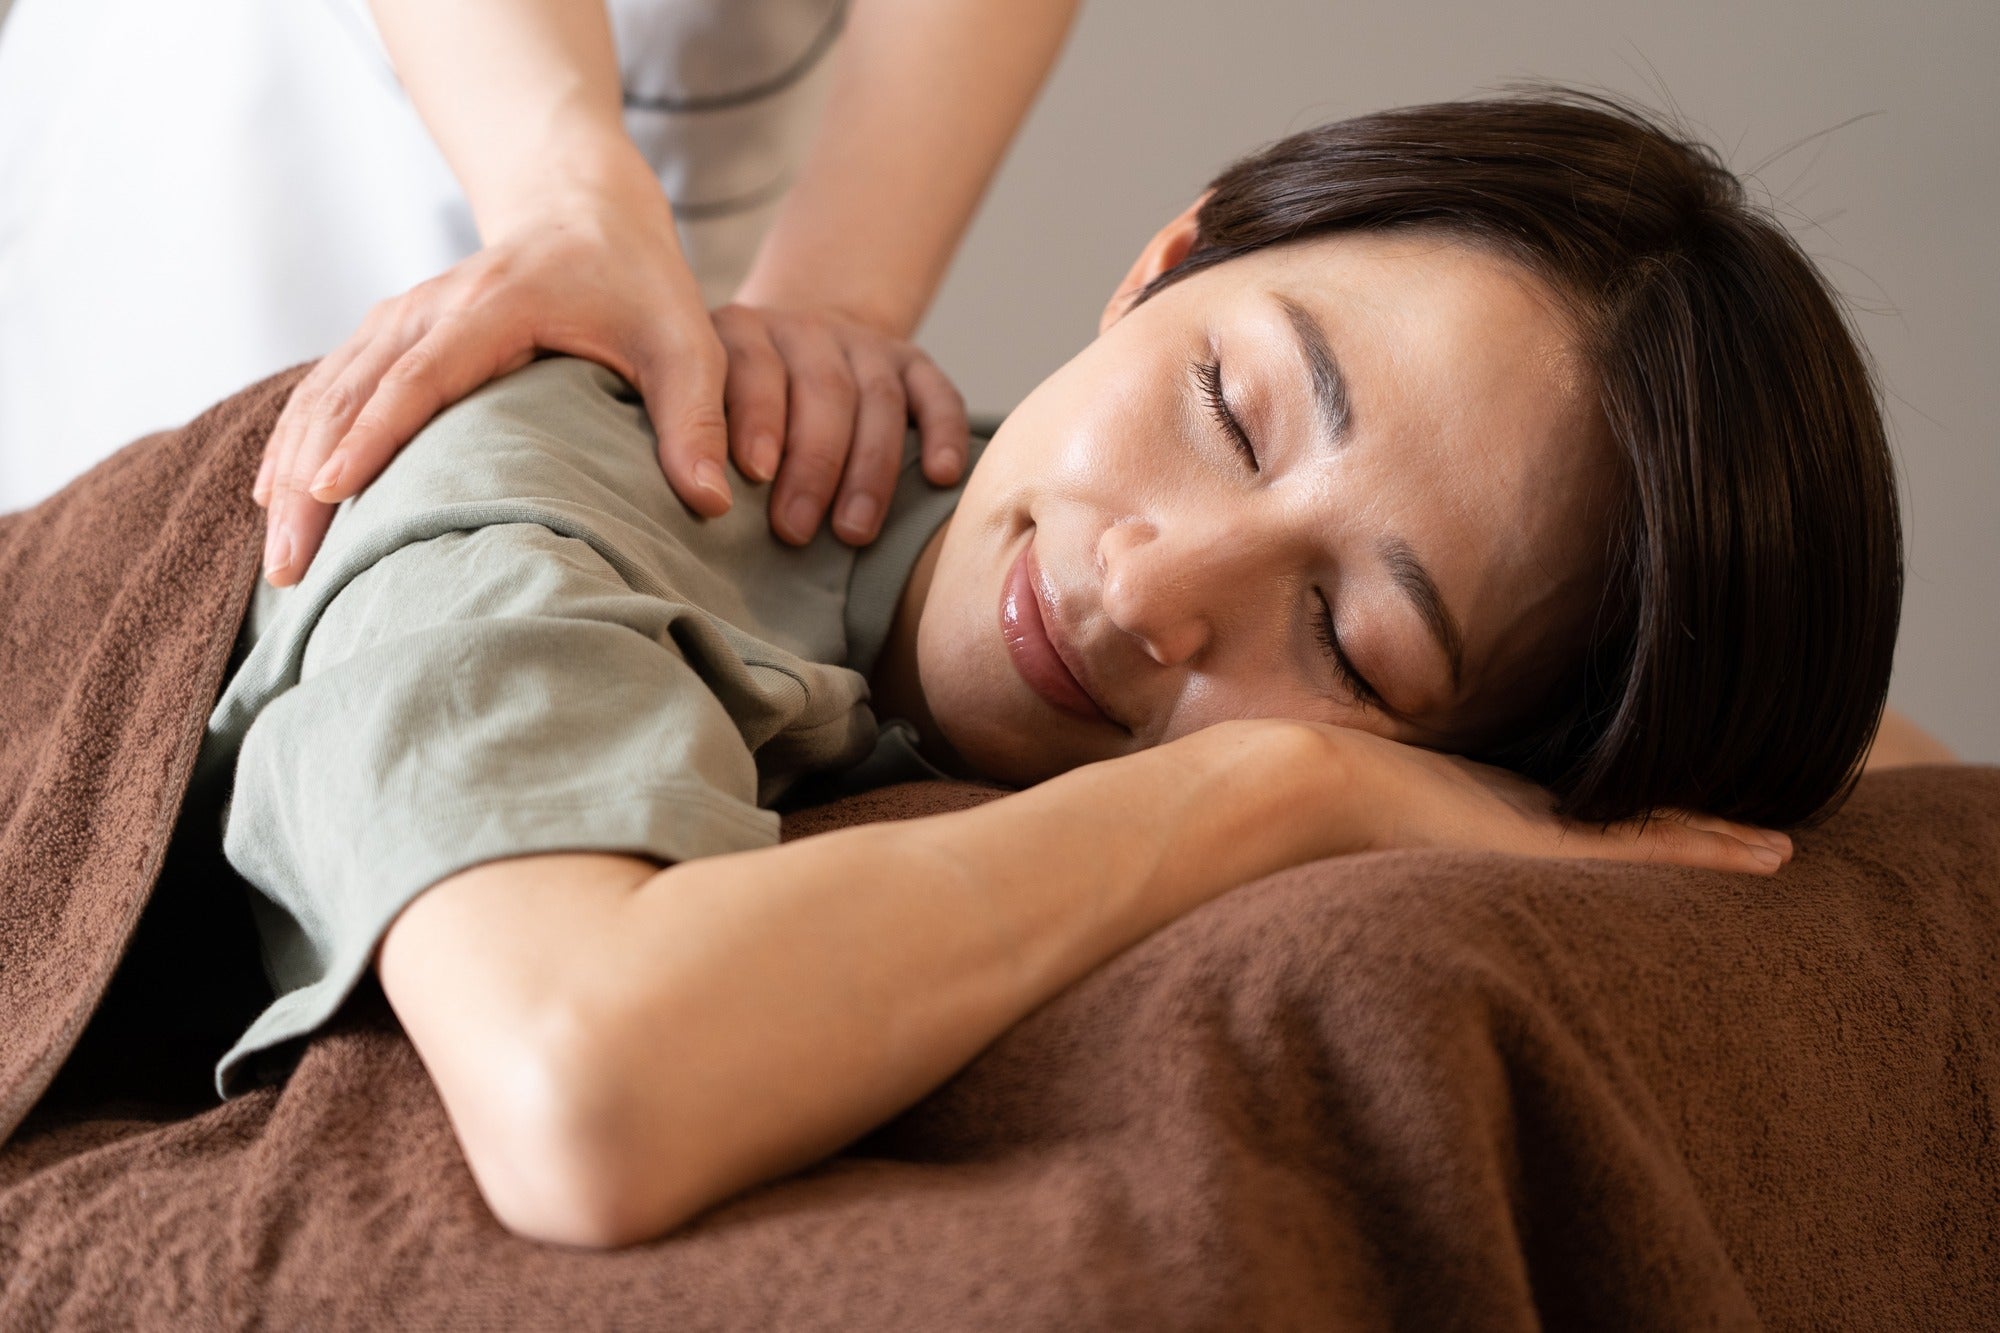 Home spa session: Smiling woman enjoying a professional massage therapy at home.